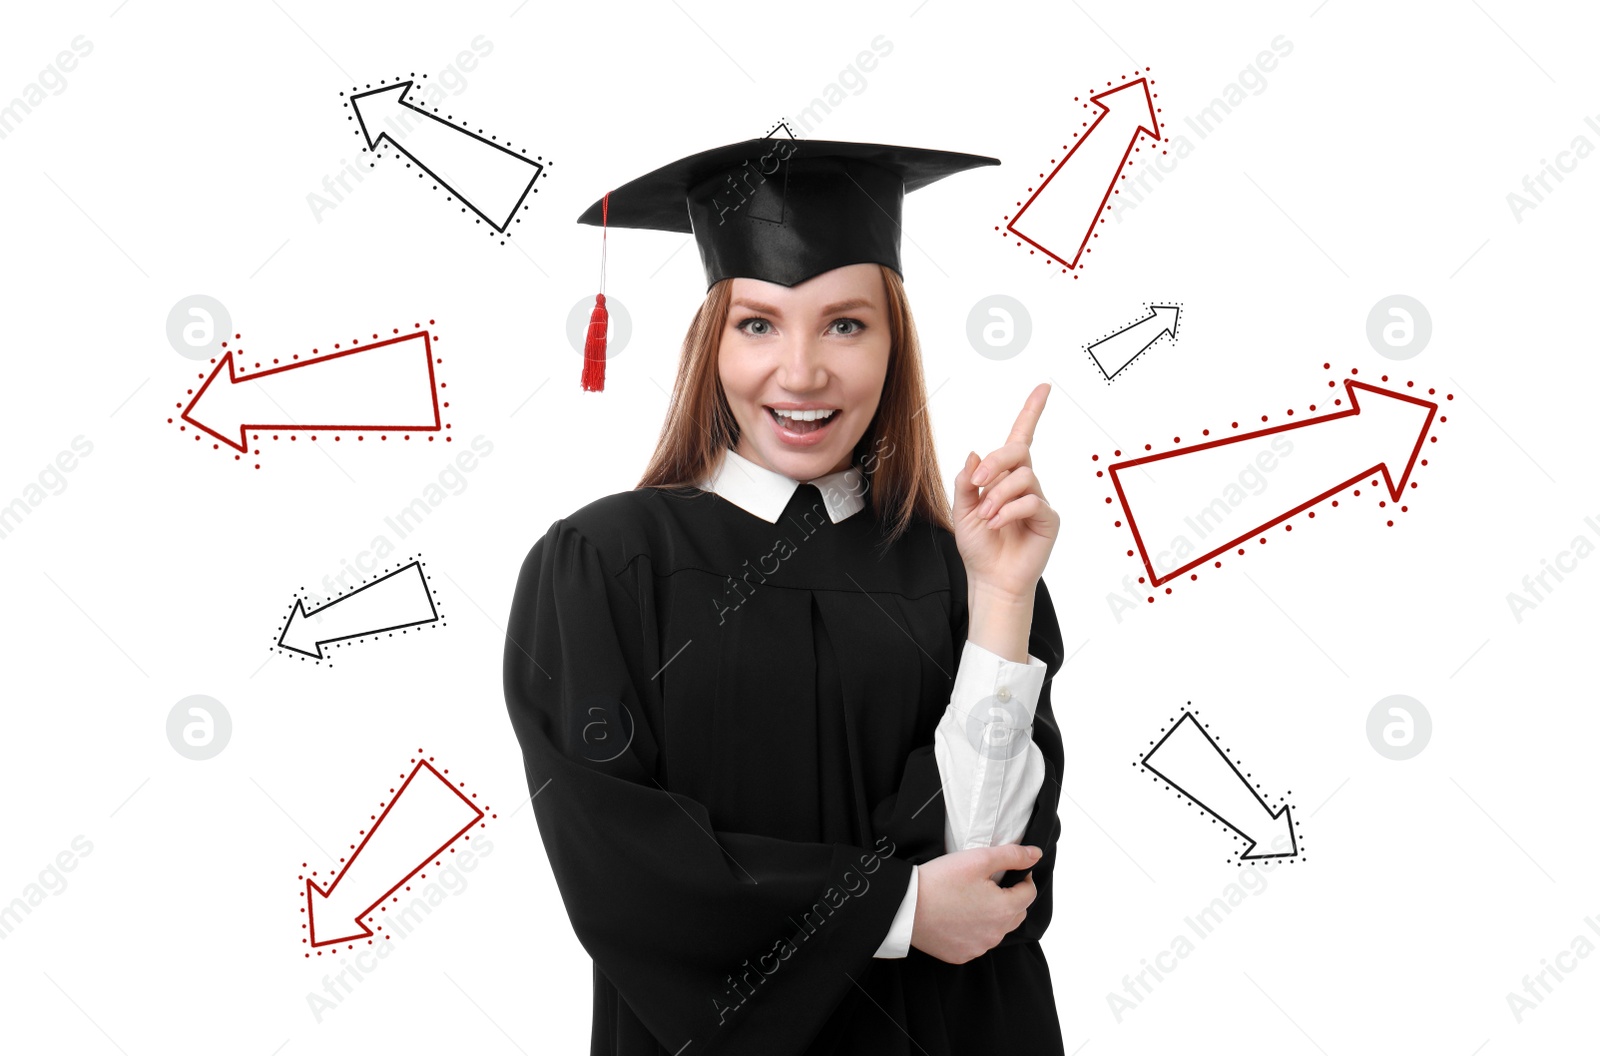 Image of Choice in profession or other areas of life, concept. Making decision, emotional young graduate surrounded by drawn arrows on white background